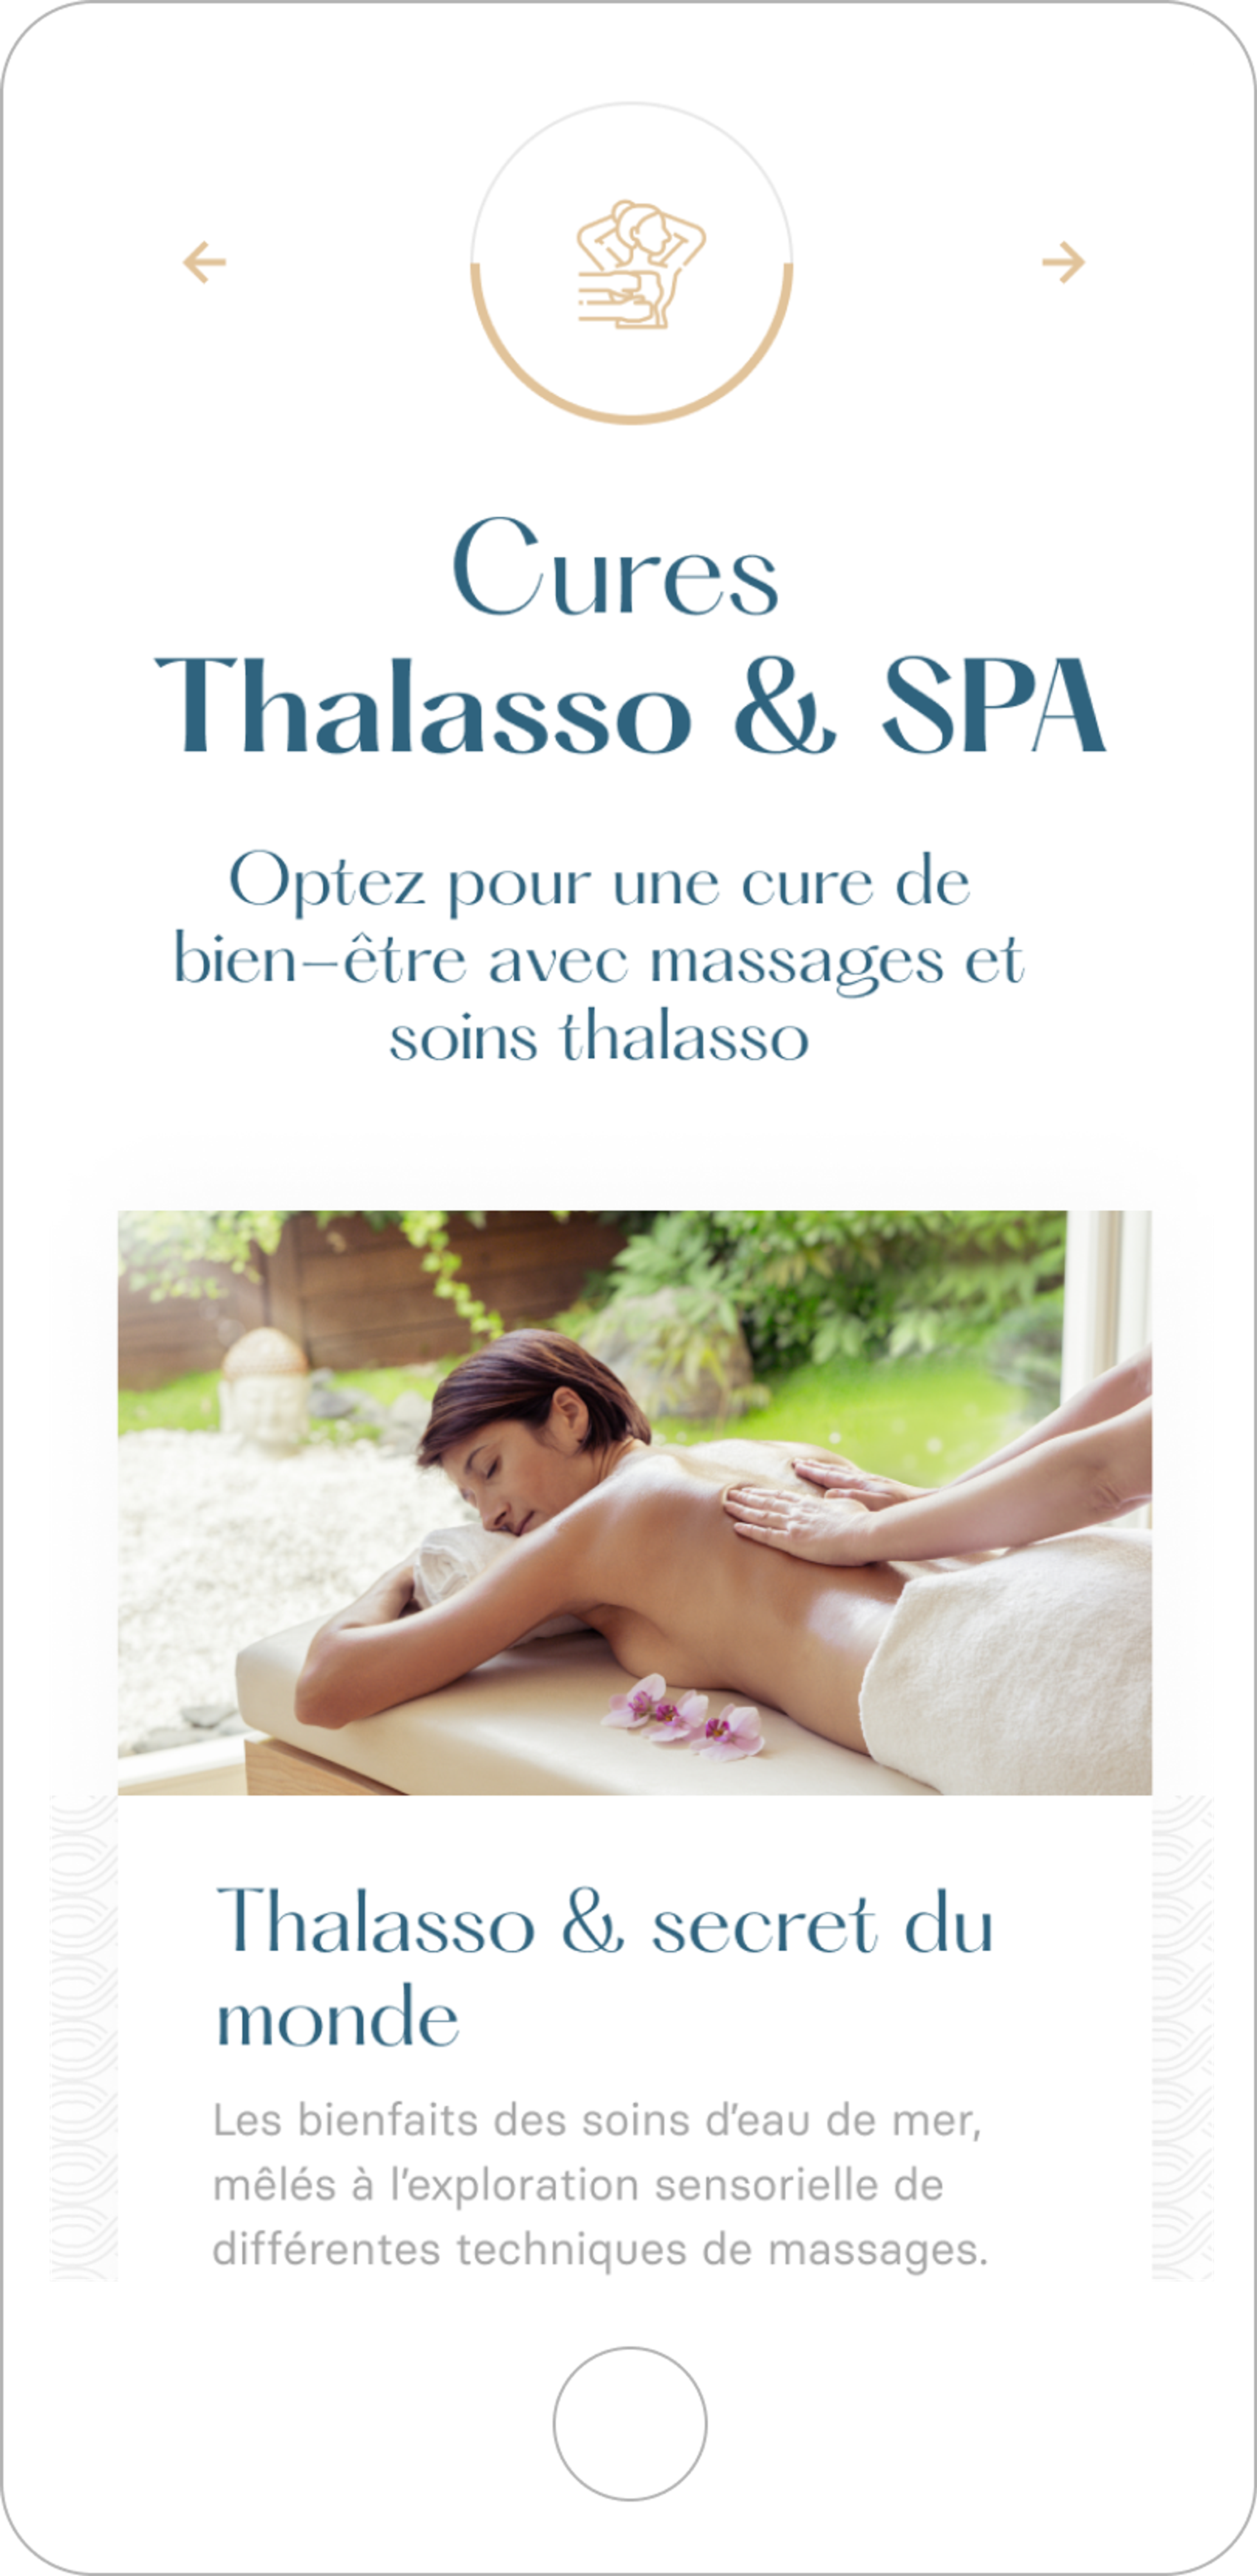 Alliance Pornic full-screen image e-commerce site mobile thalassotherapy cure